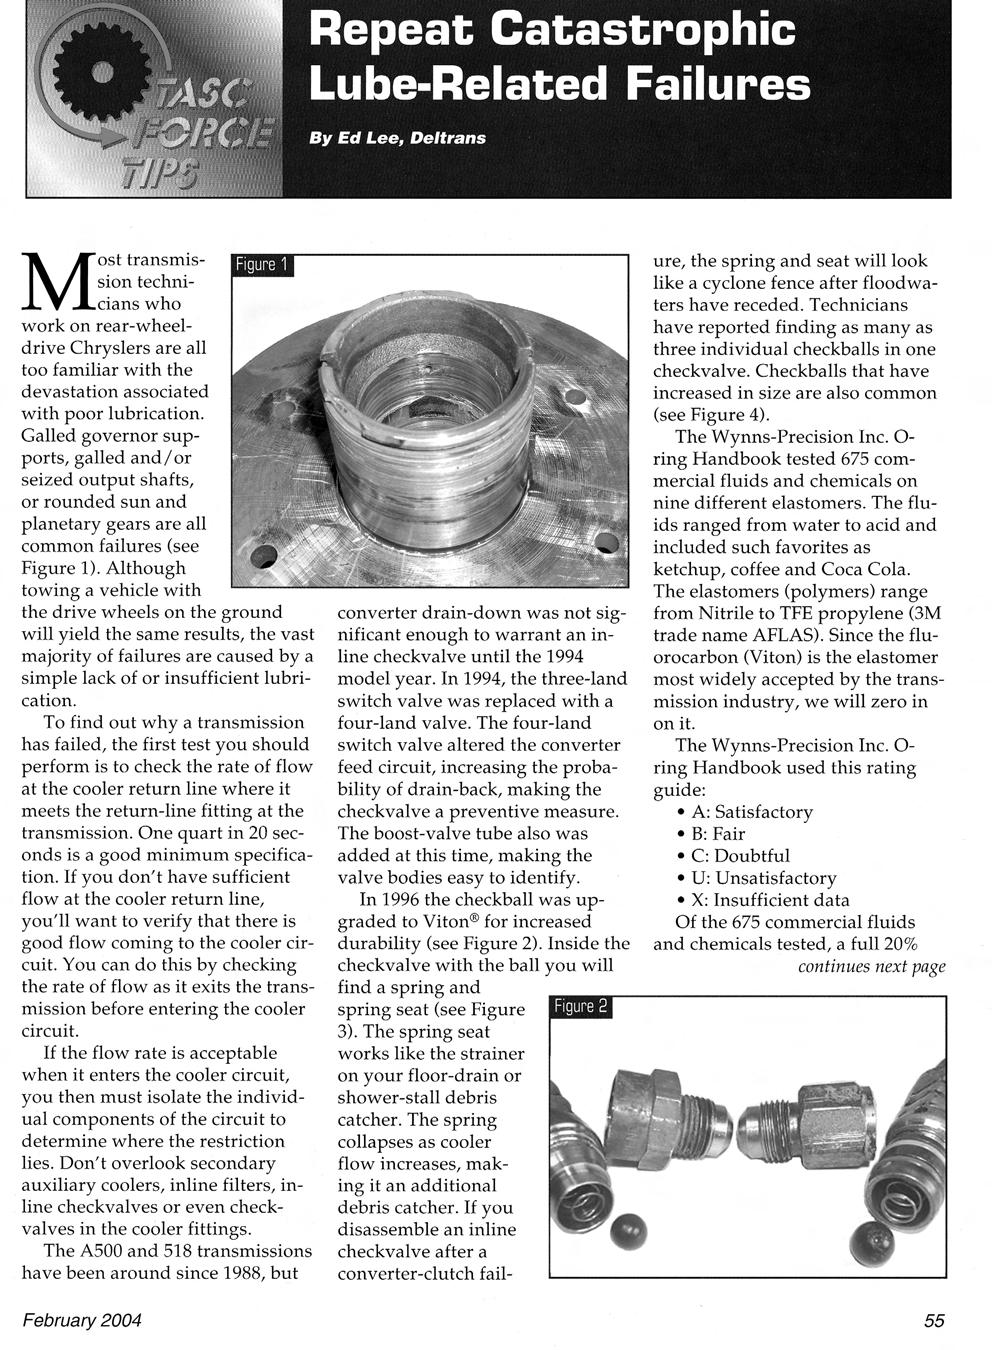 TASC Force Tech Tips Article, February 2004 Transmission Digest